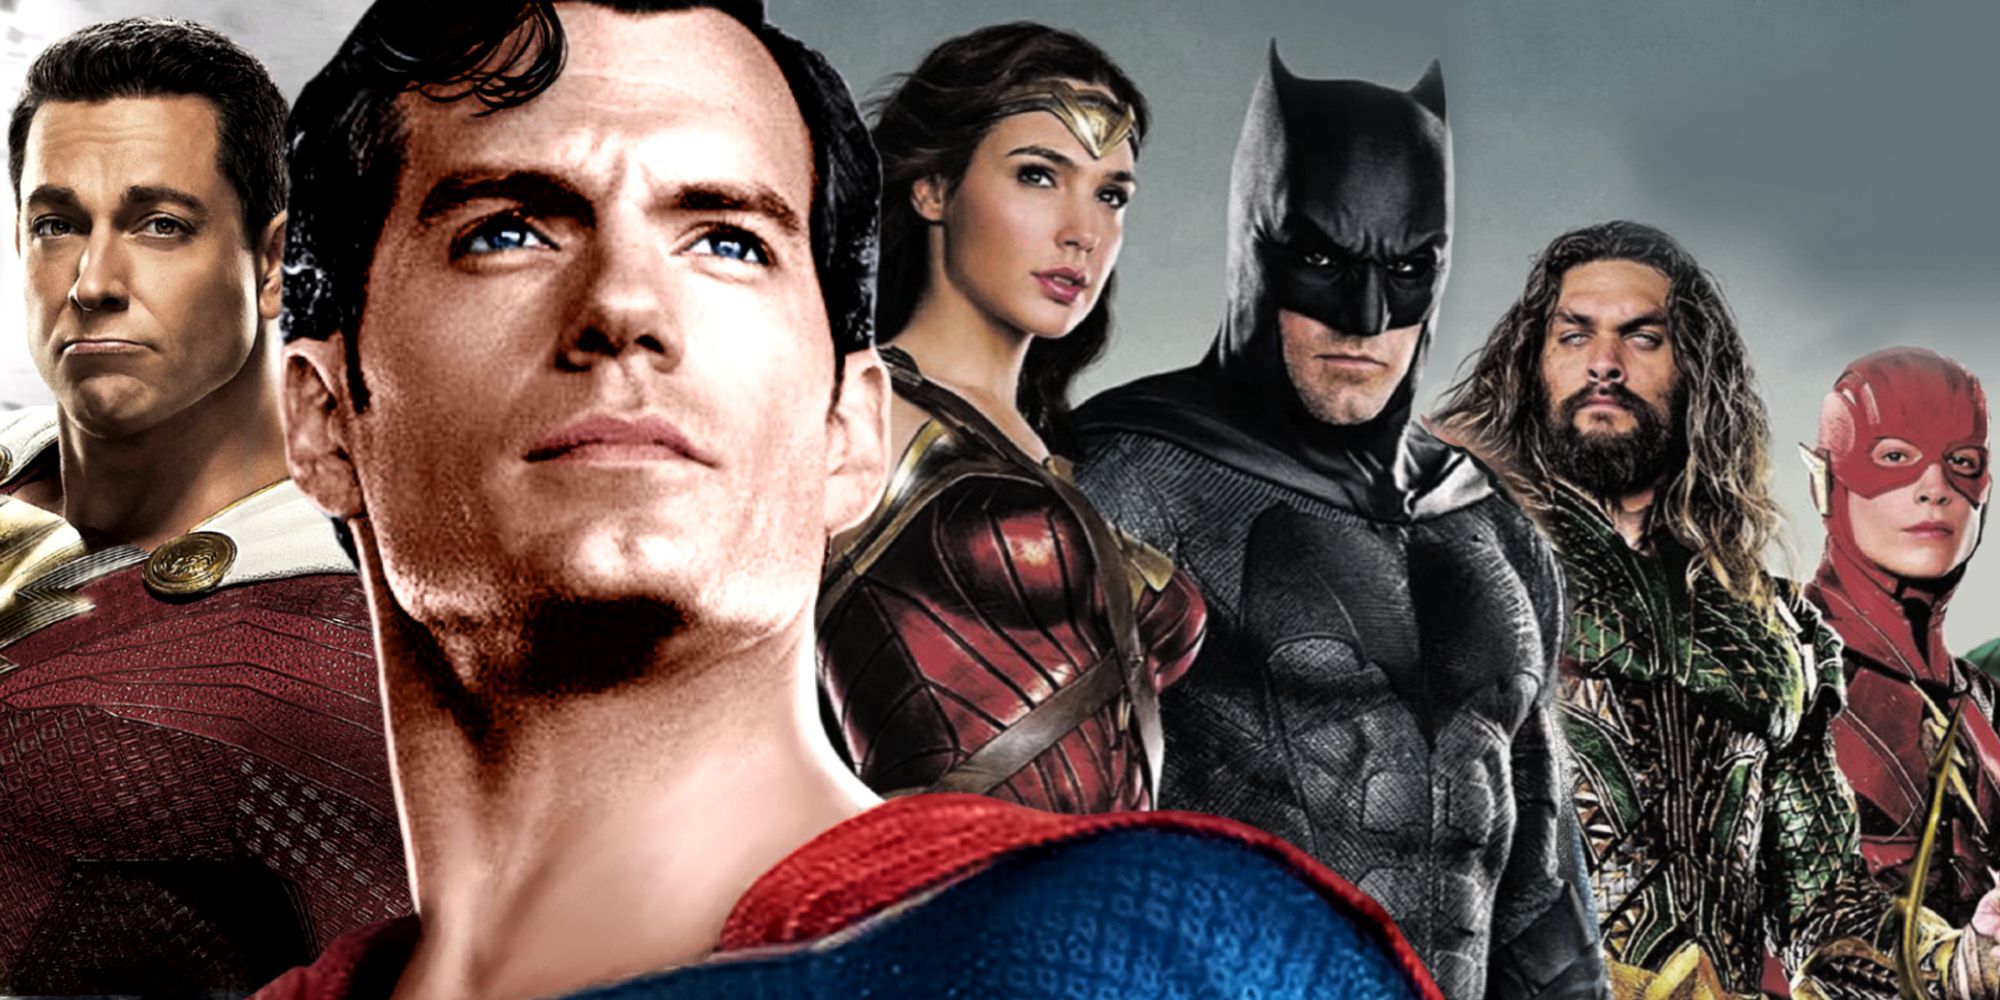 Henry Cavill's Superman and the DCEU Justice League